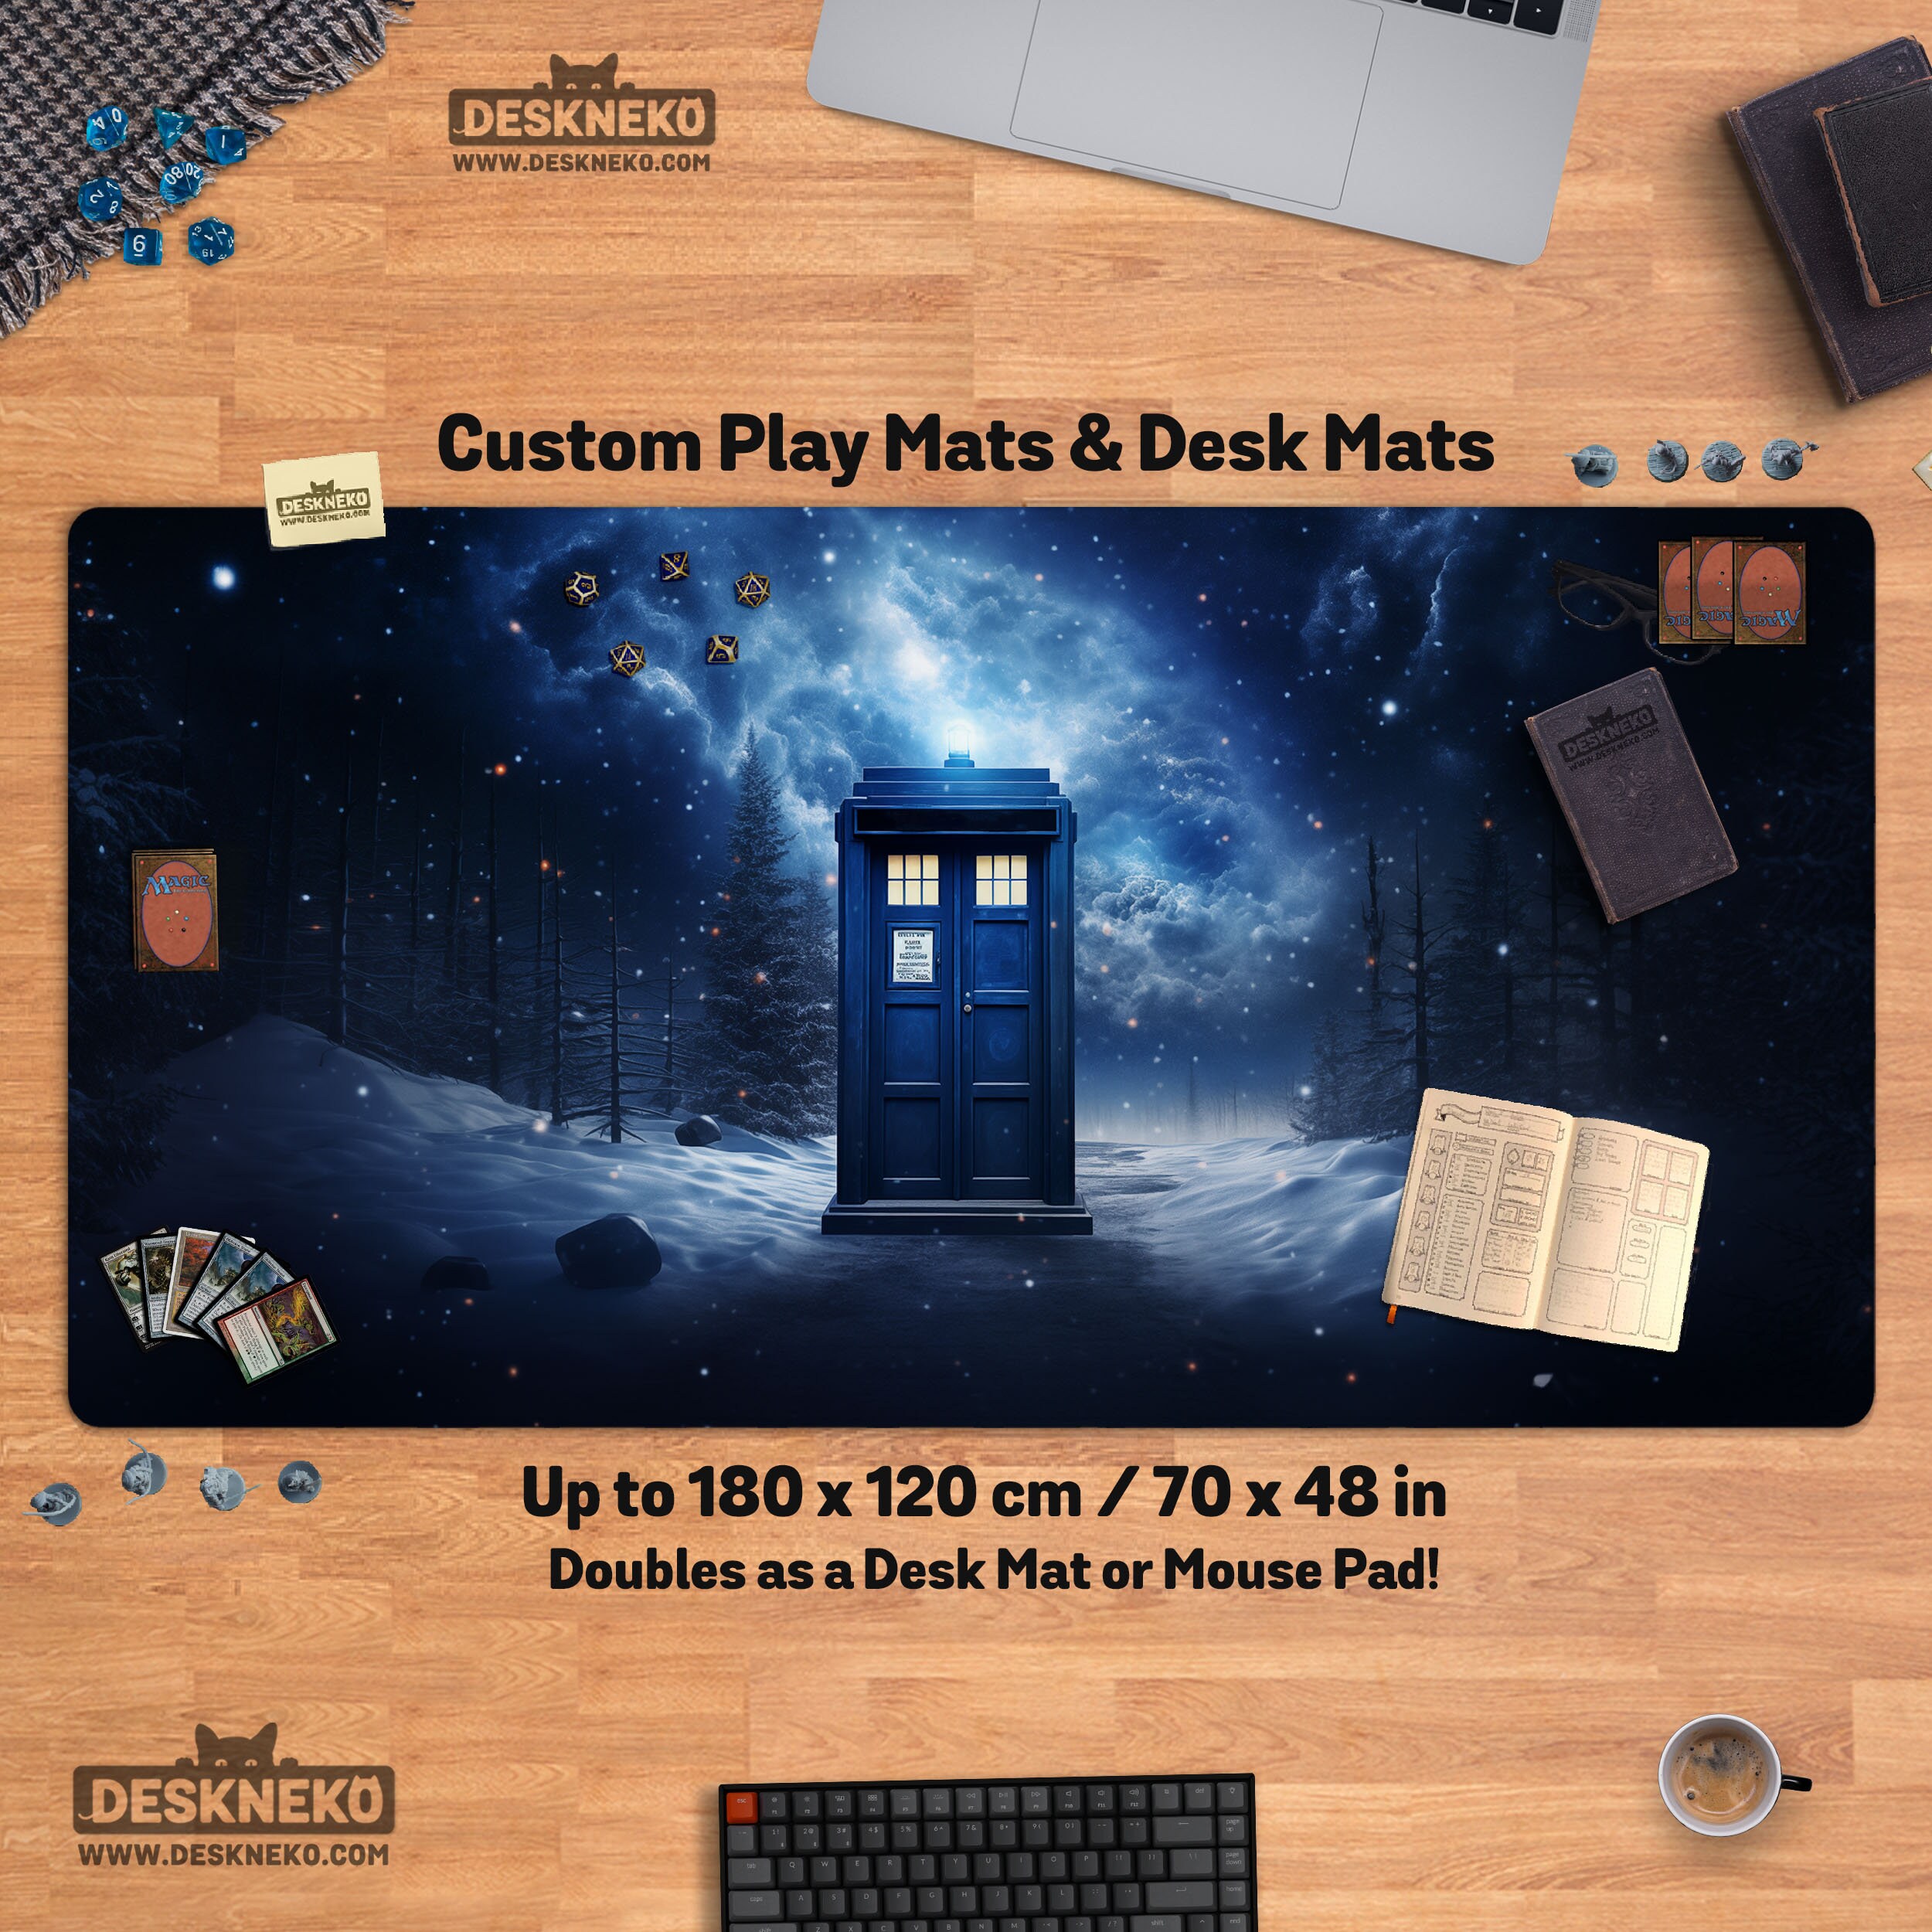 Casematix TCG Playmat with Reusable Playmat Case - Premium 24 inch x 13.5 inch Card Game Mat & Compatible MtG Playmat for All TCGs with Non-Slip